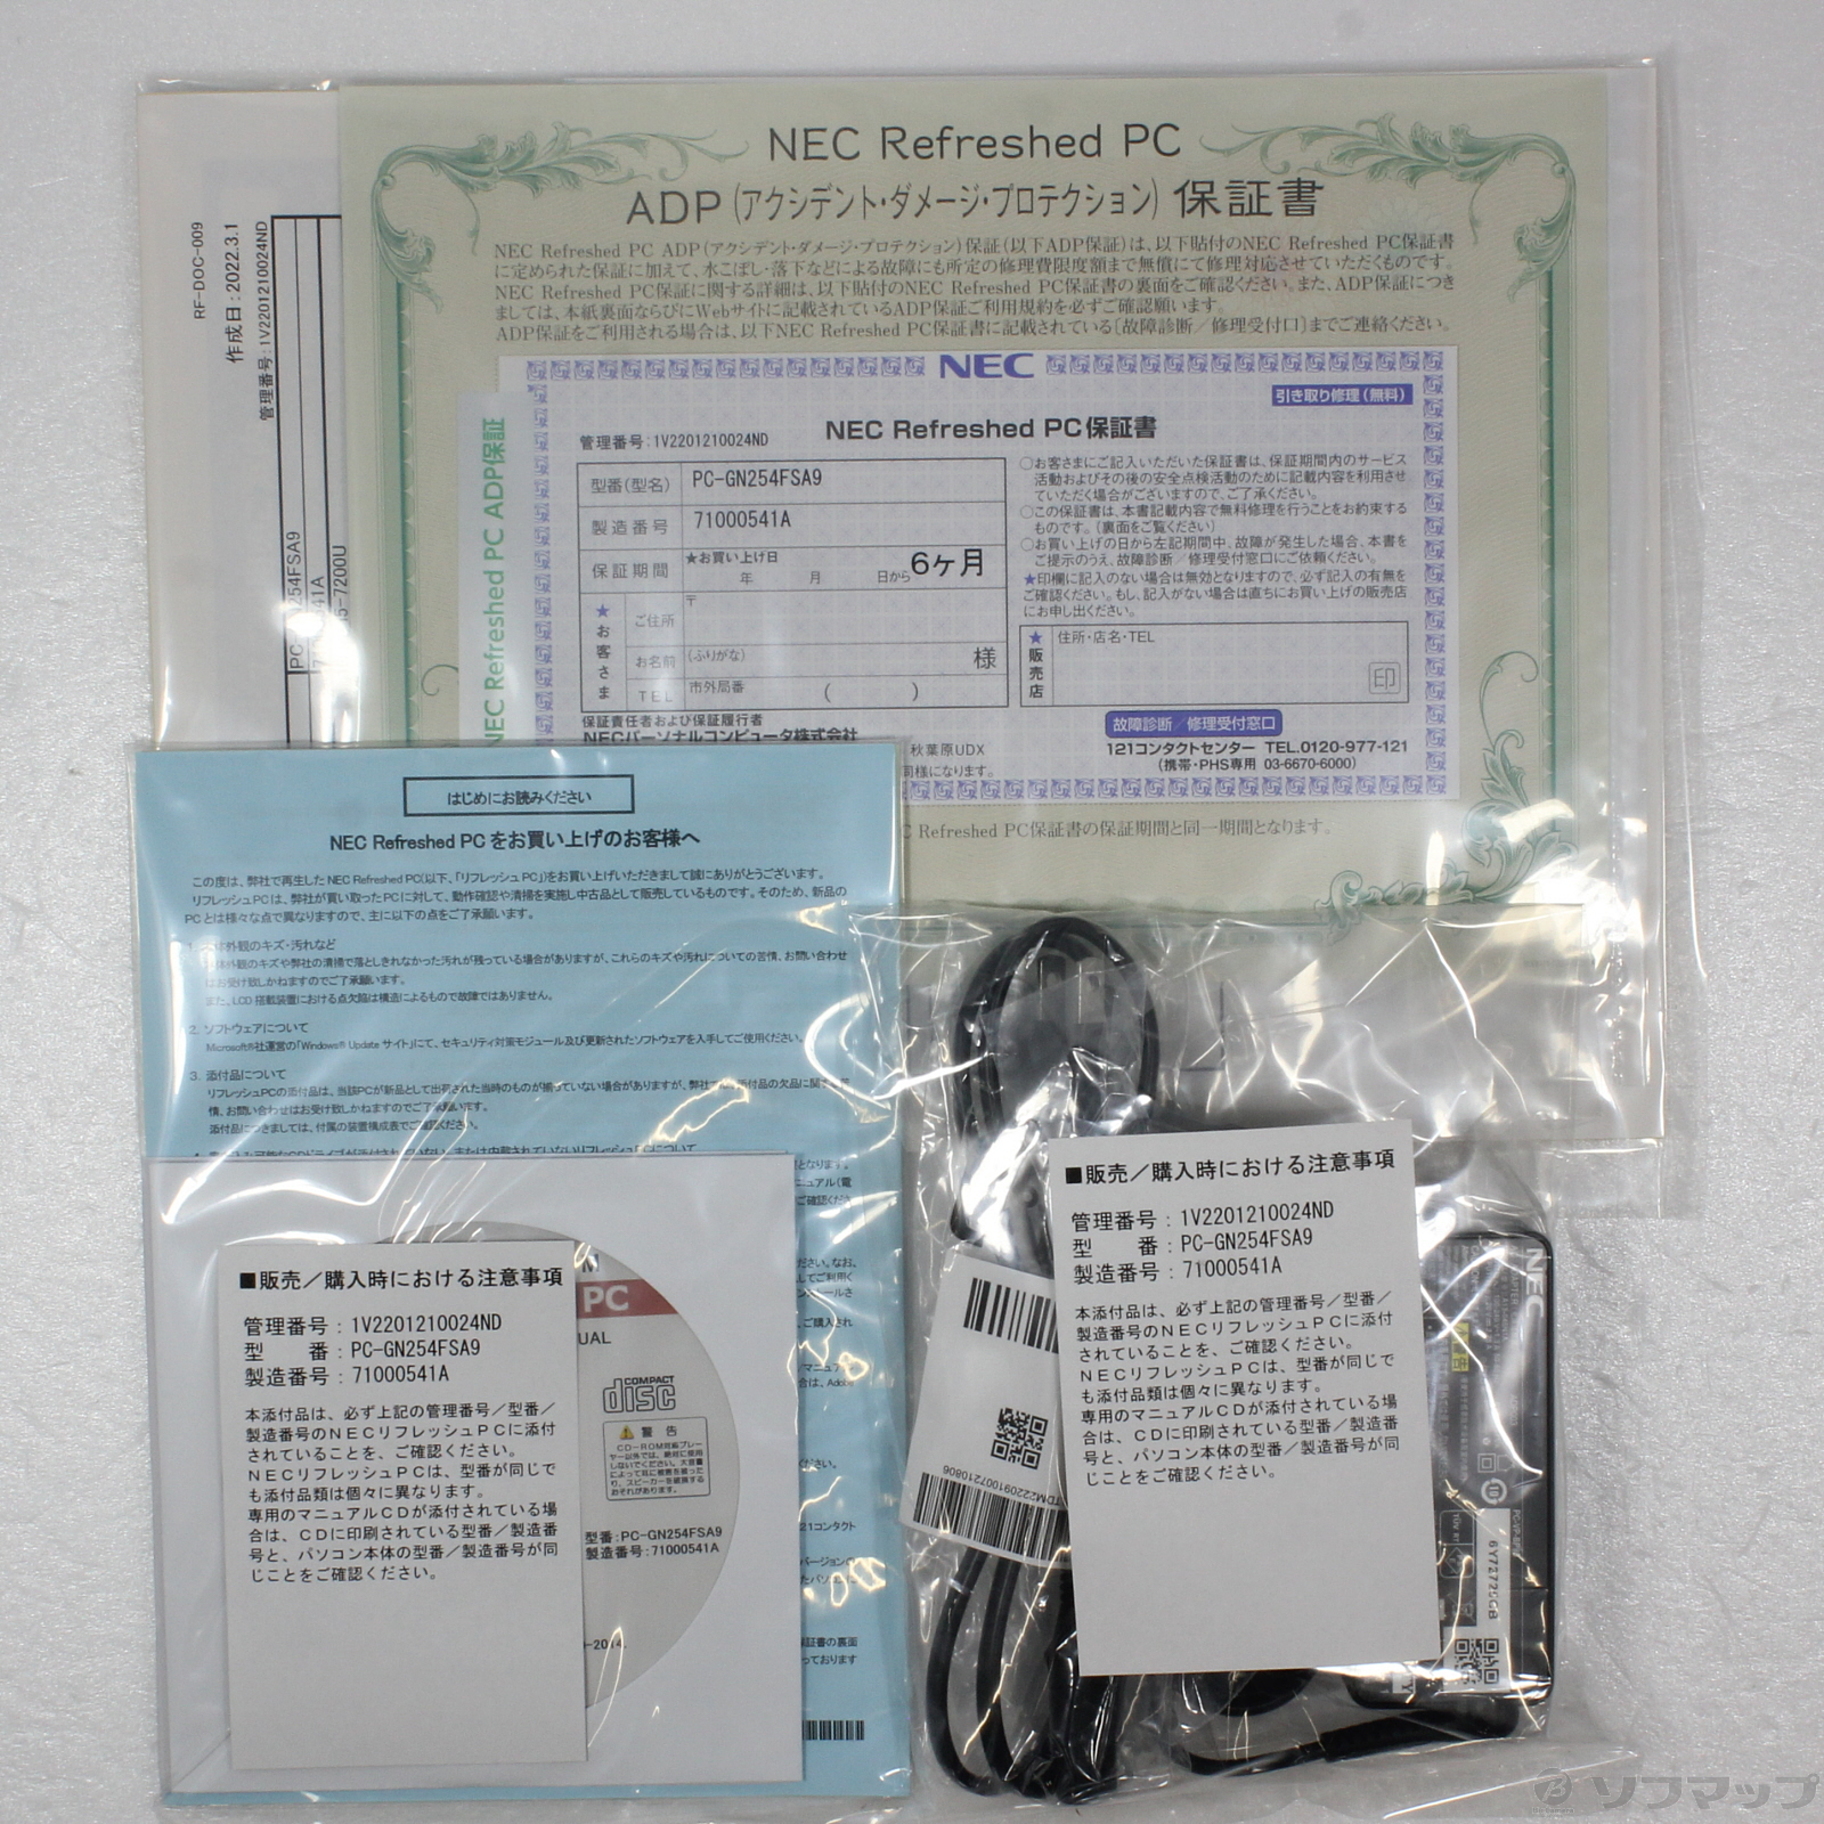 LAVIE Direct NS PC-GN254FSA9 〔NEC Refreshed PC〕 〔Windows 10〕 ≪メーカー保証あり≫  ◇04/22(金)新入荷！